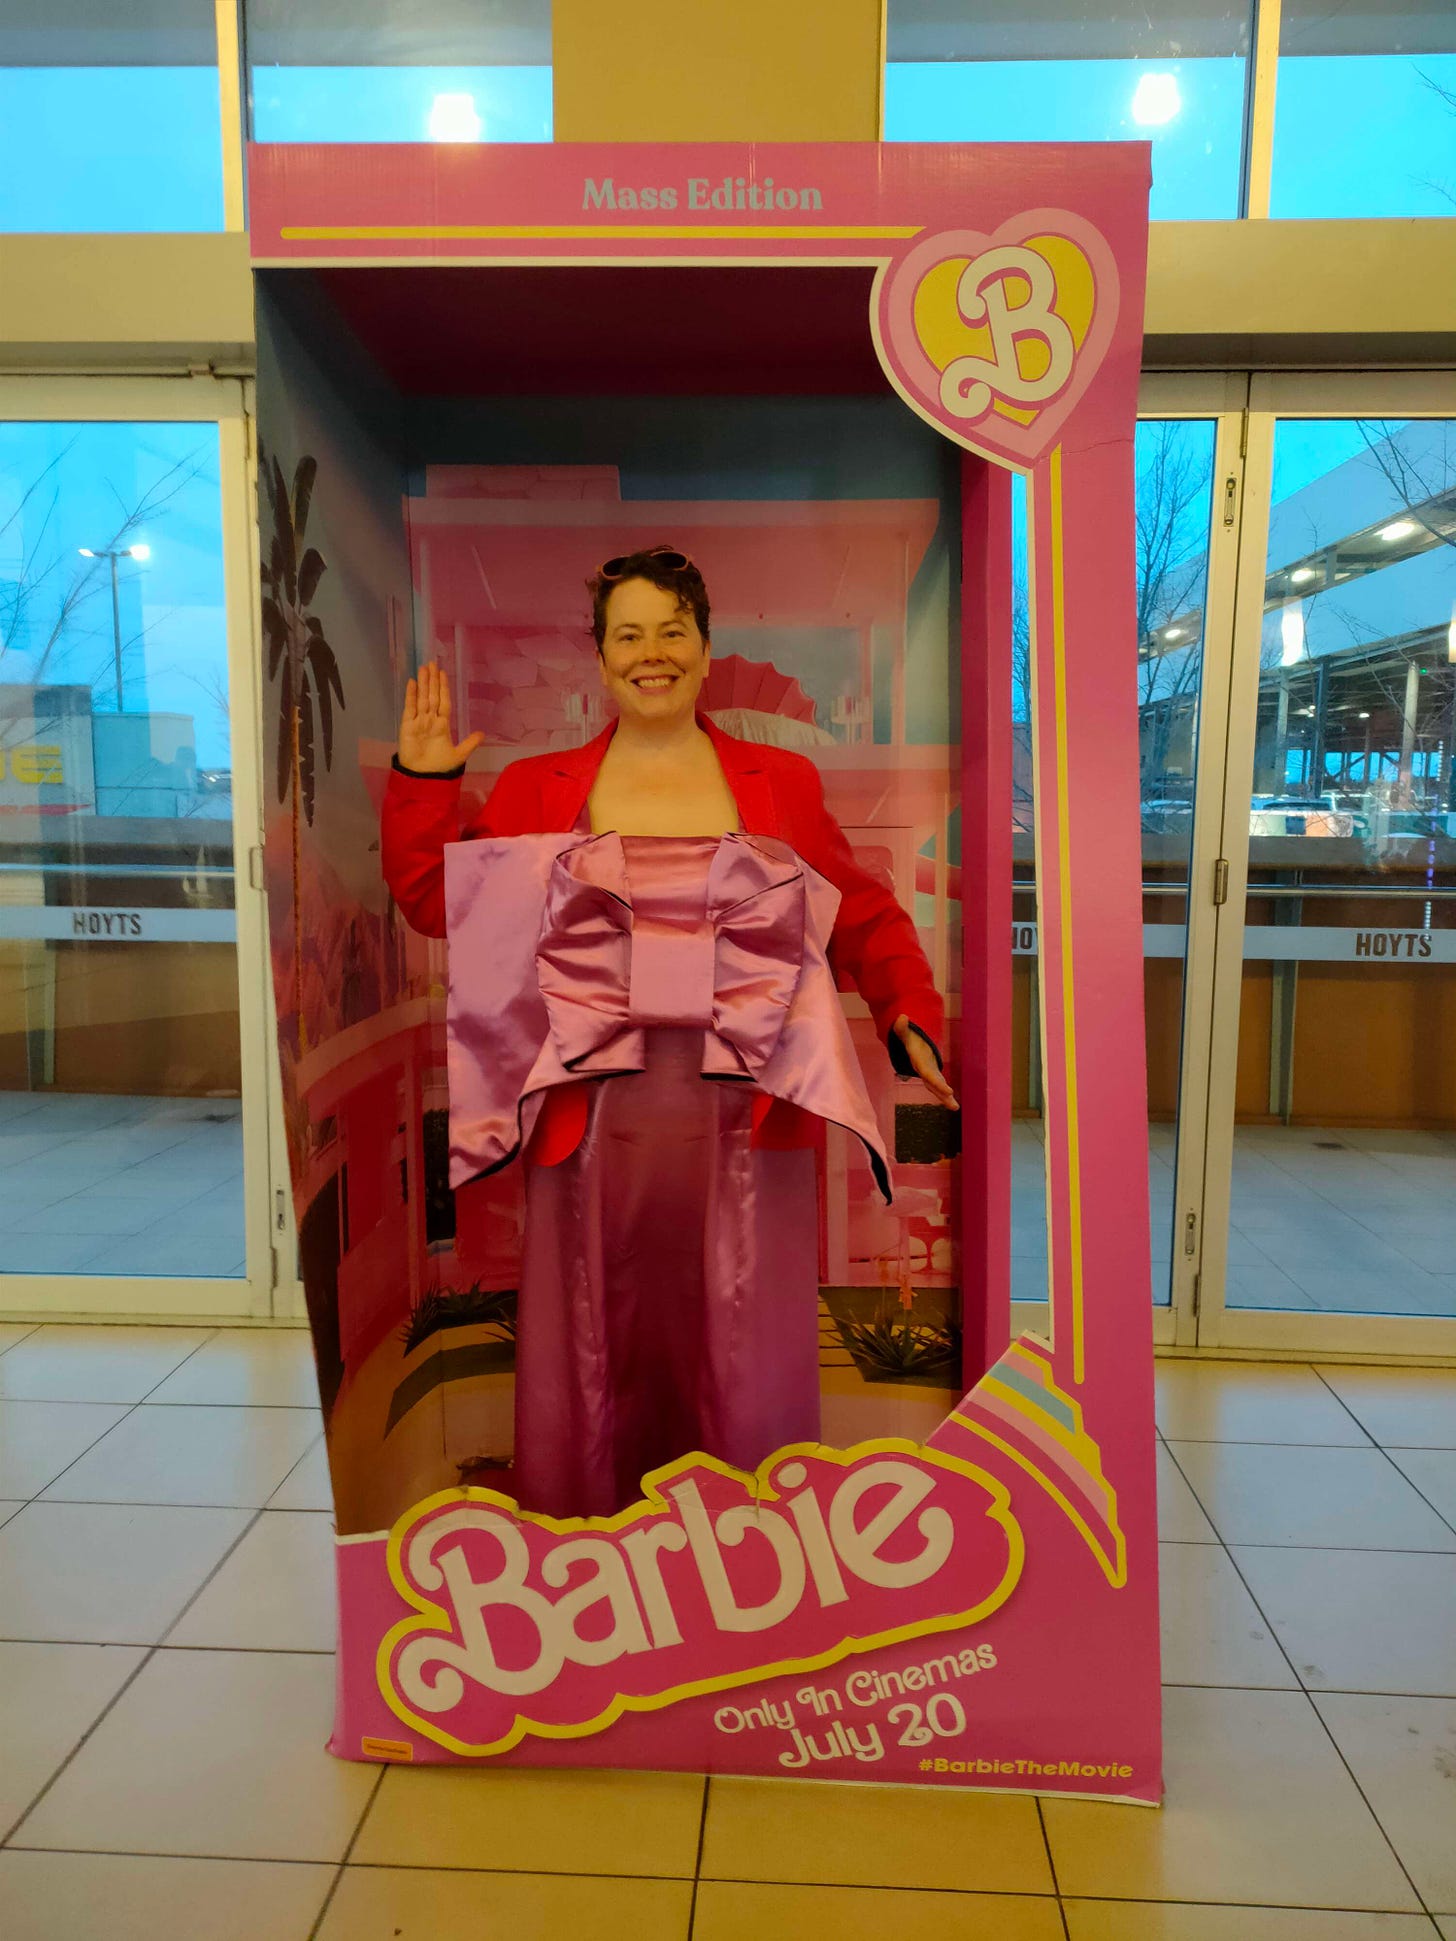 The author, a white woman with short dark hair, stands in a box designed to look like Barbie doll packaging. She wears a dark pink blazer-style jacket and a mid-pink shiny long gown with a low square neckline. The dress sports a truly gigantic 3D bow that has a ton of interfacing to make it stiff.